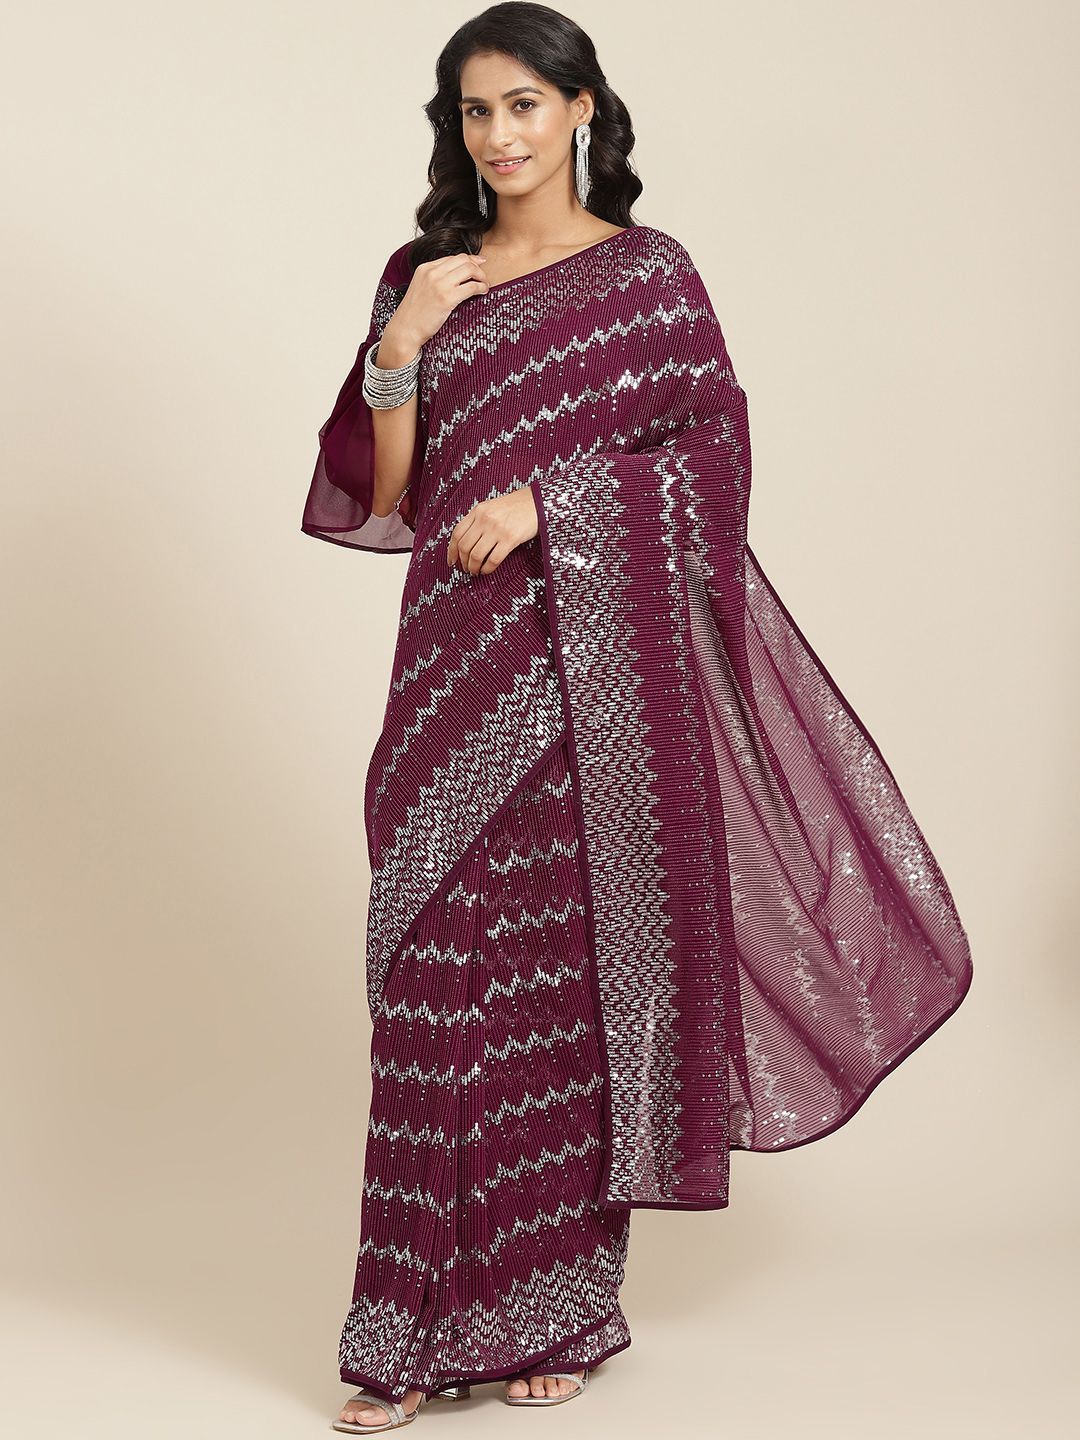 Readiprint Fashions Purple Sequinned Pure Georgette Saree Price in India